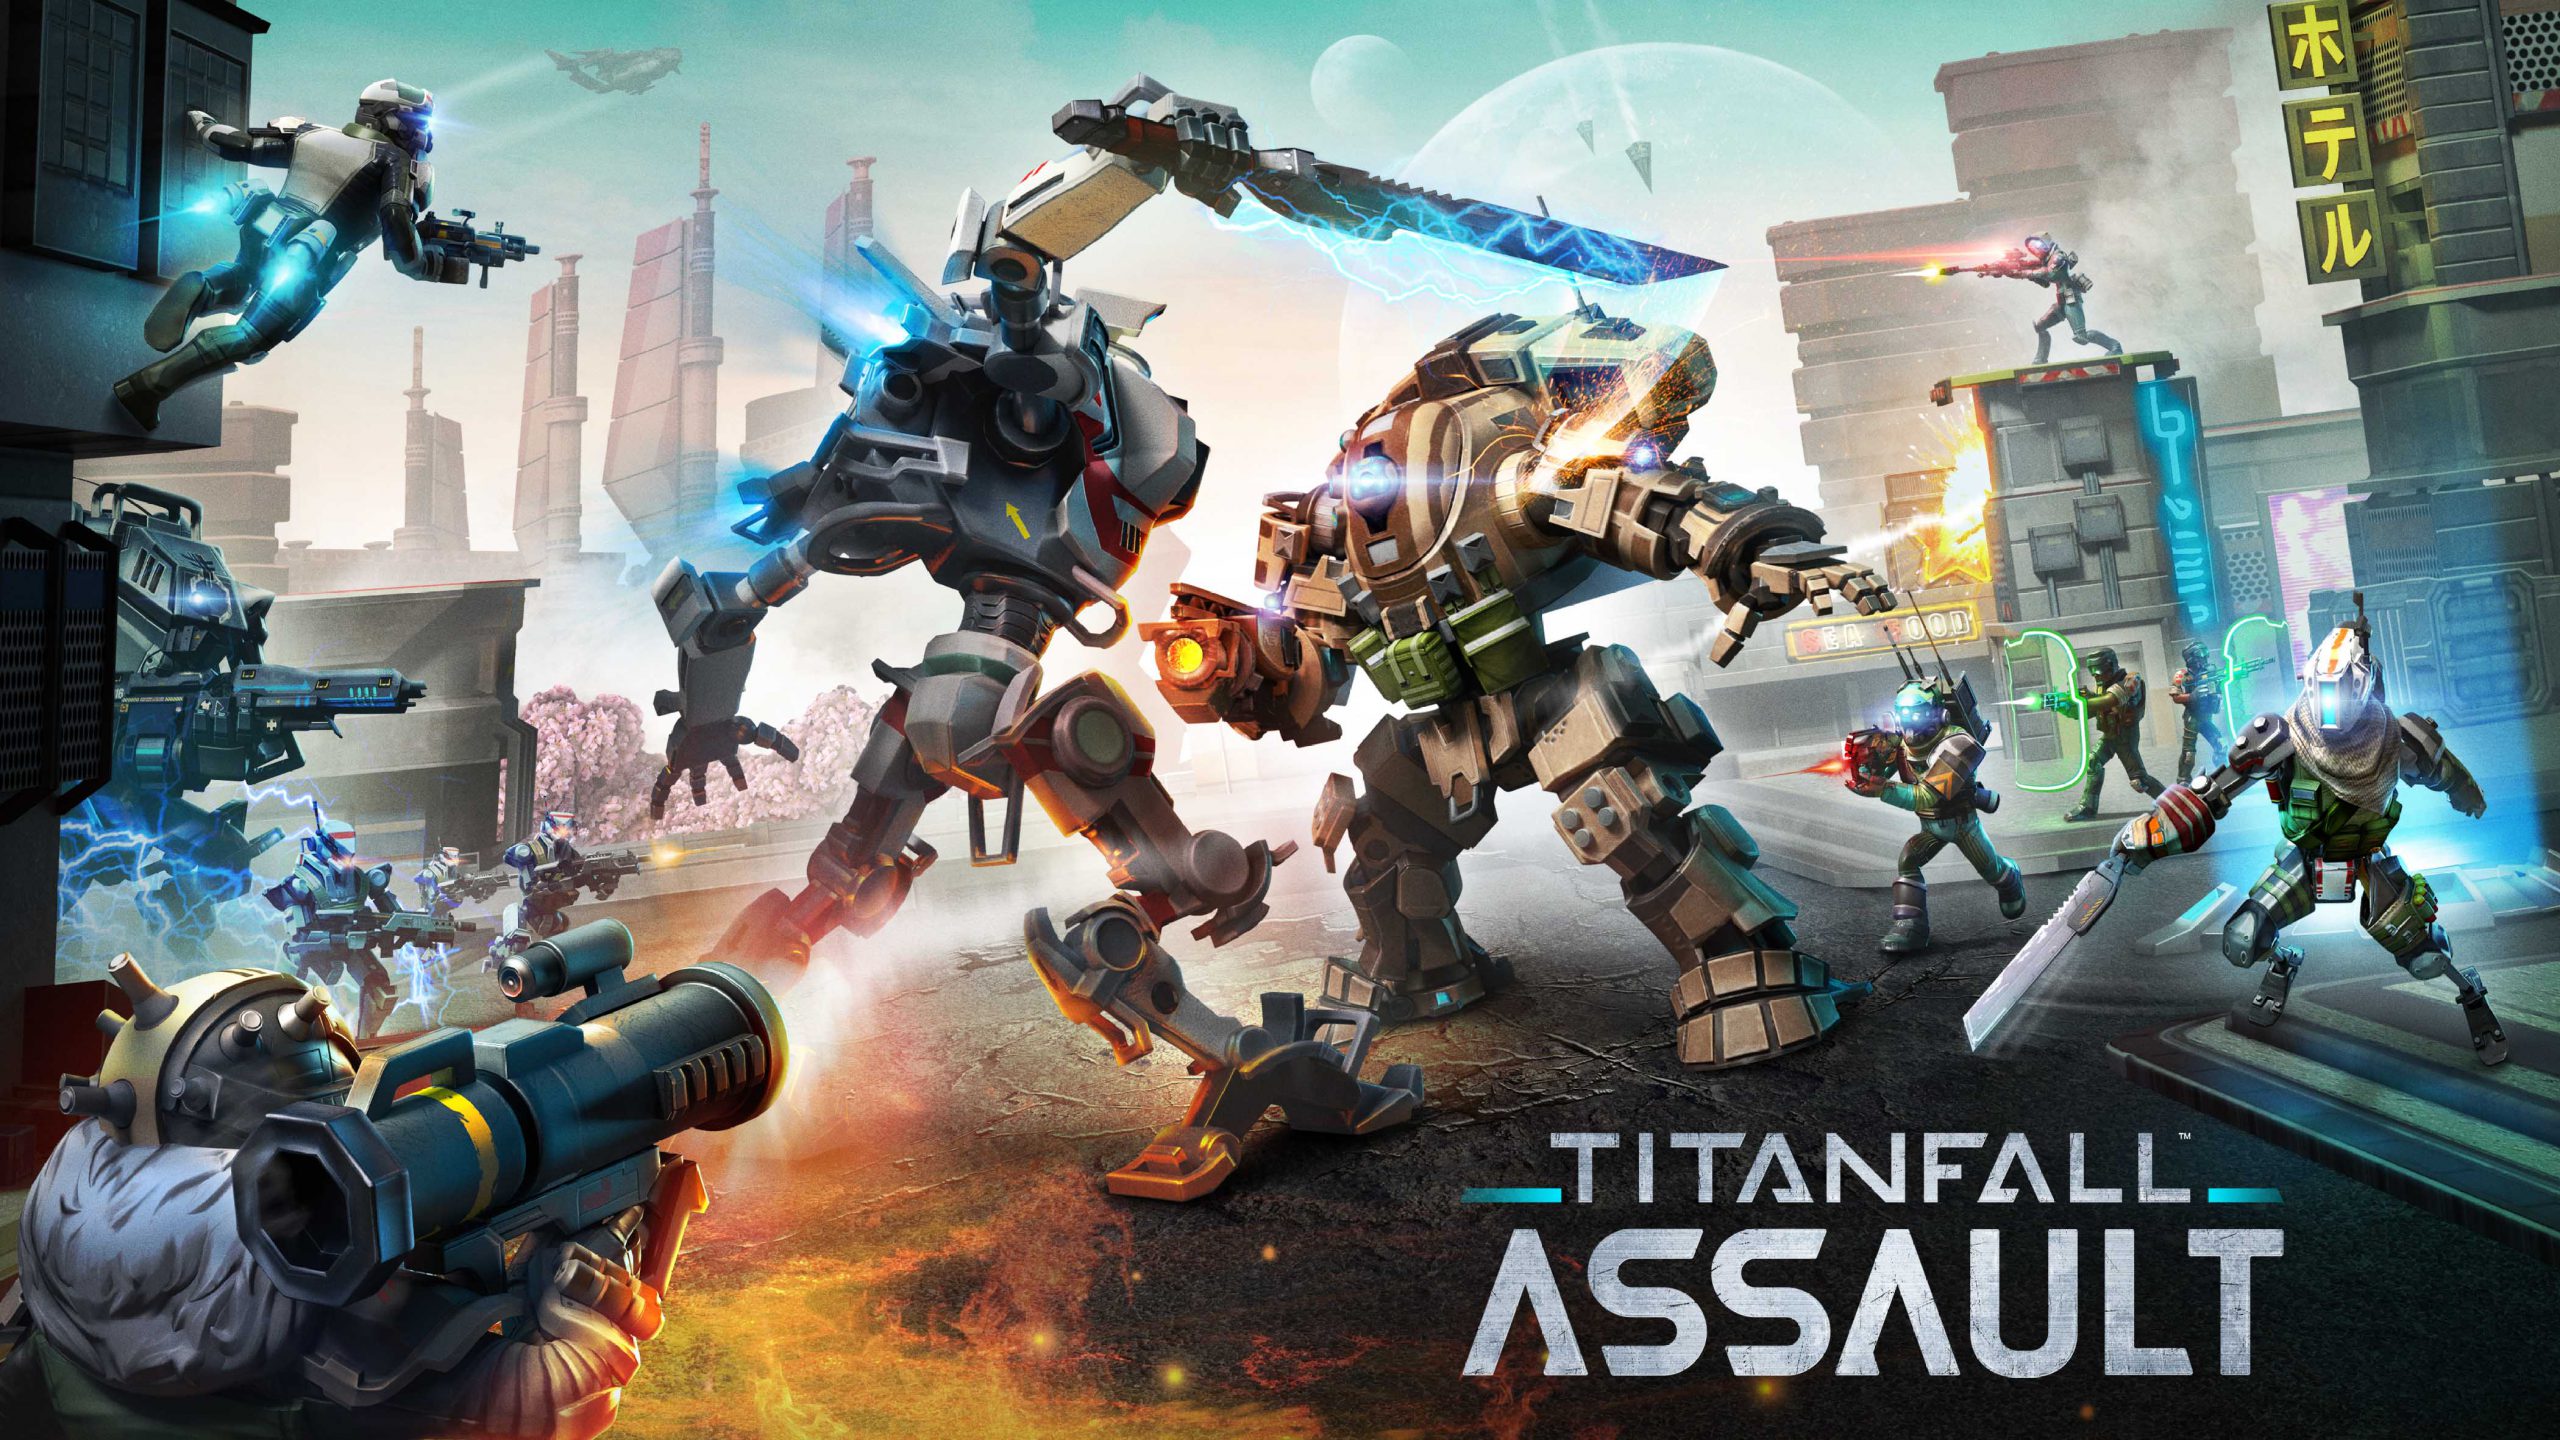 Prepare for Titanfall: Assault to Launch Worldwide Aug 10